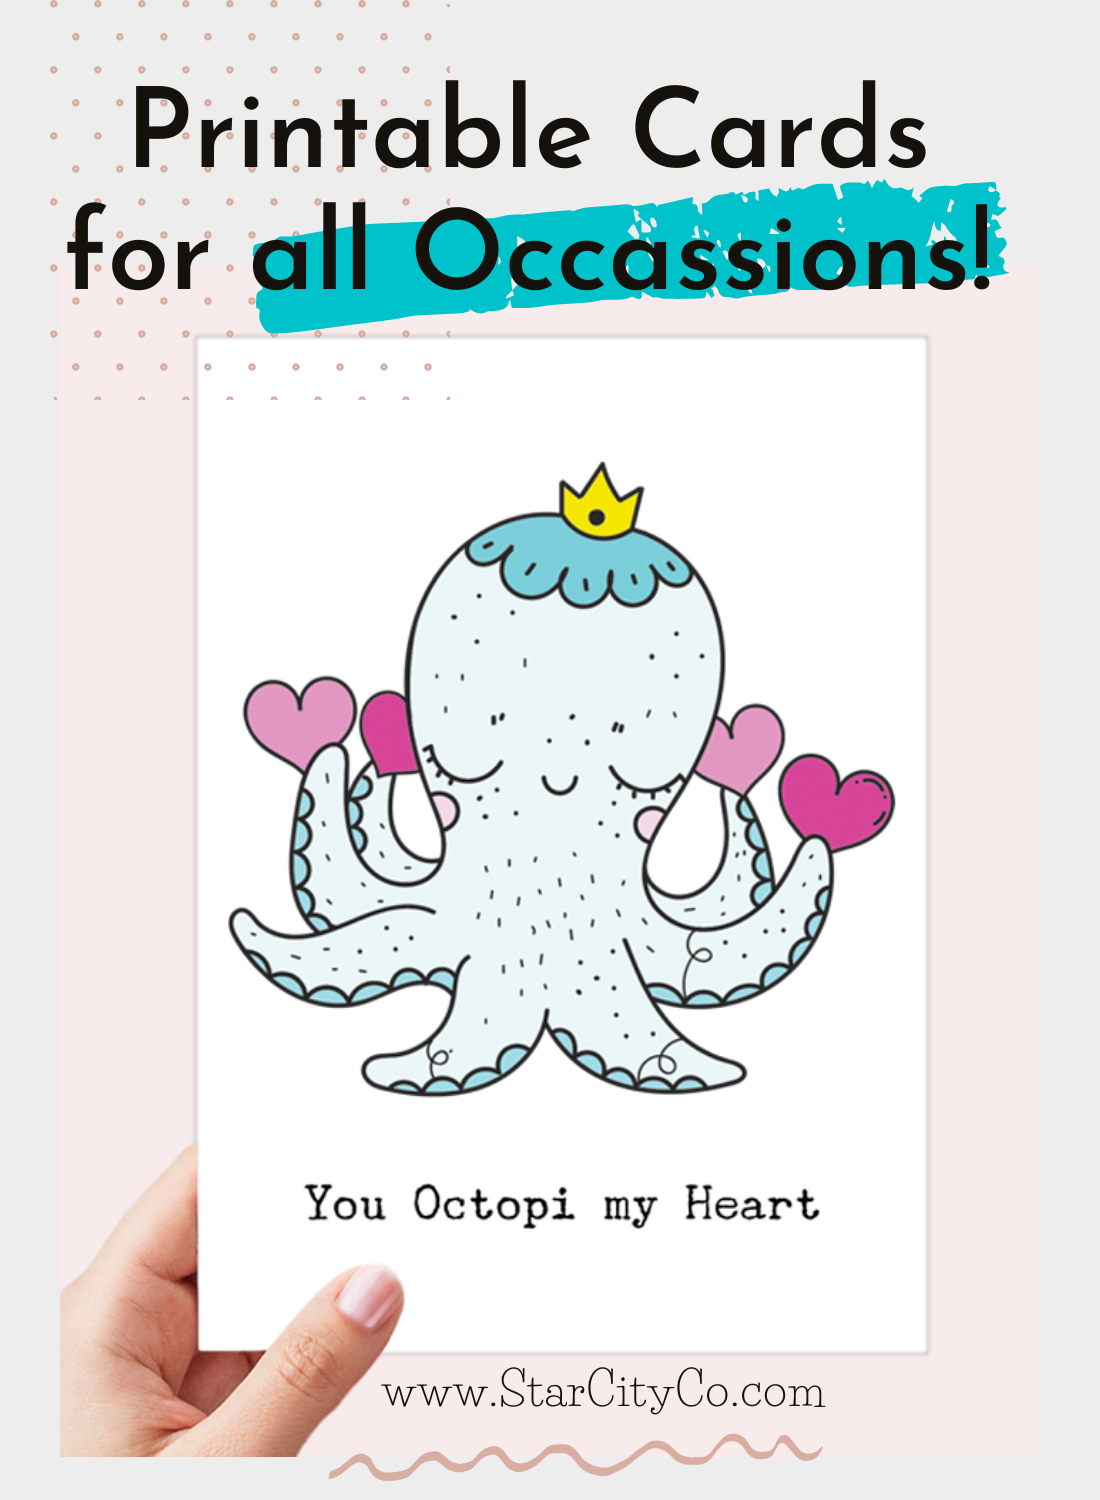 You Octopi my Heart - Octopus Love Card Printable - Digital Download